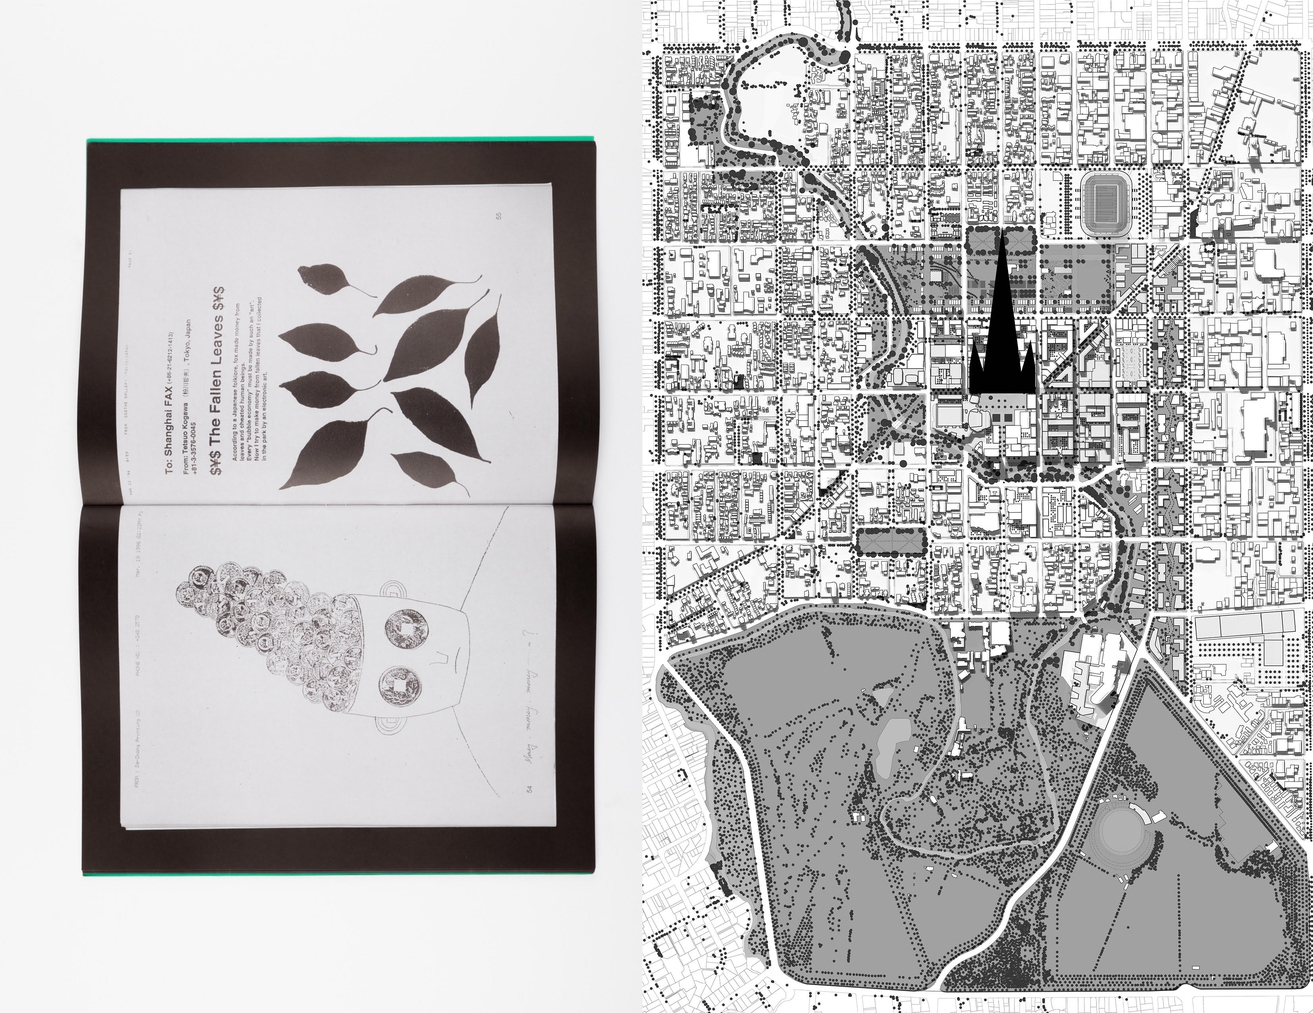 Photo credits: Left, spread from Re-print #2 Shanghai Fax published by 3-ply. Right, map of Christchurch by Matt Galloway.